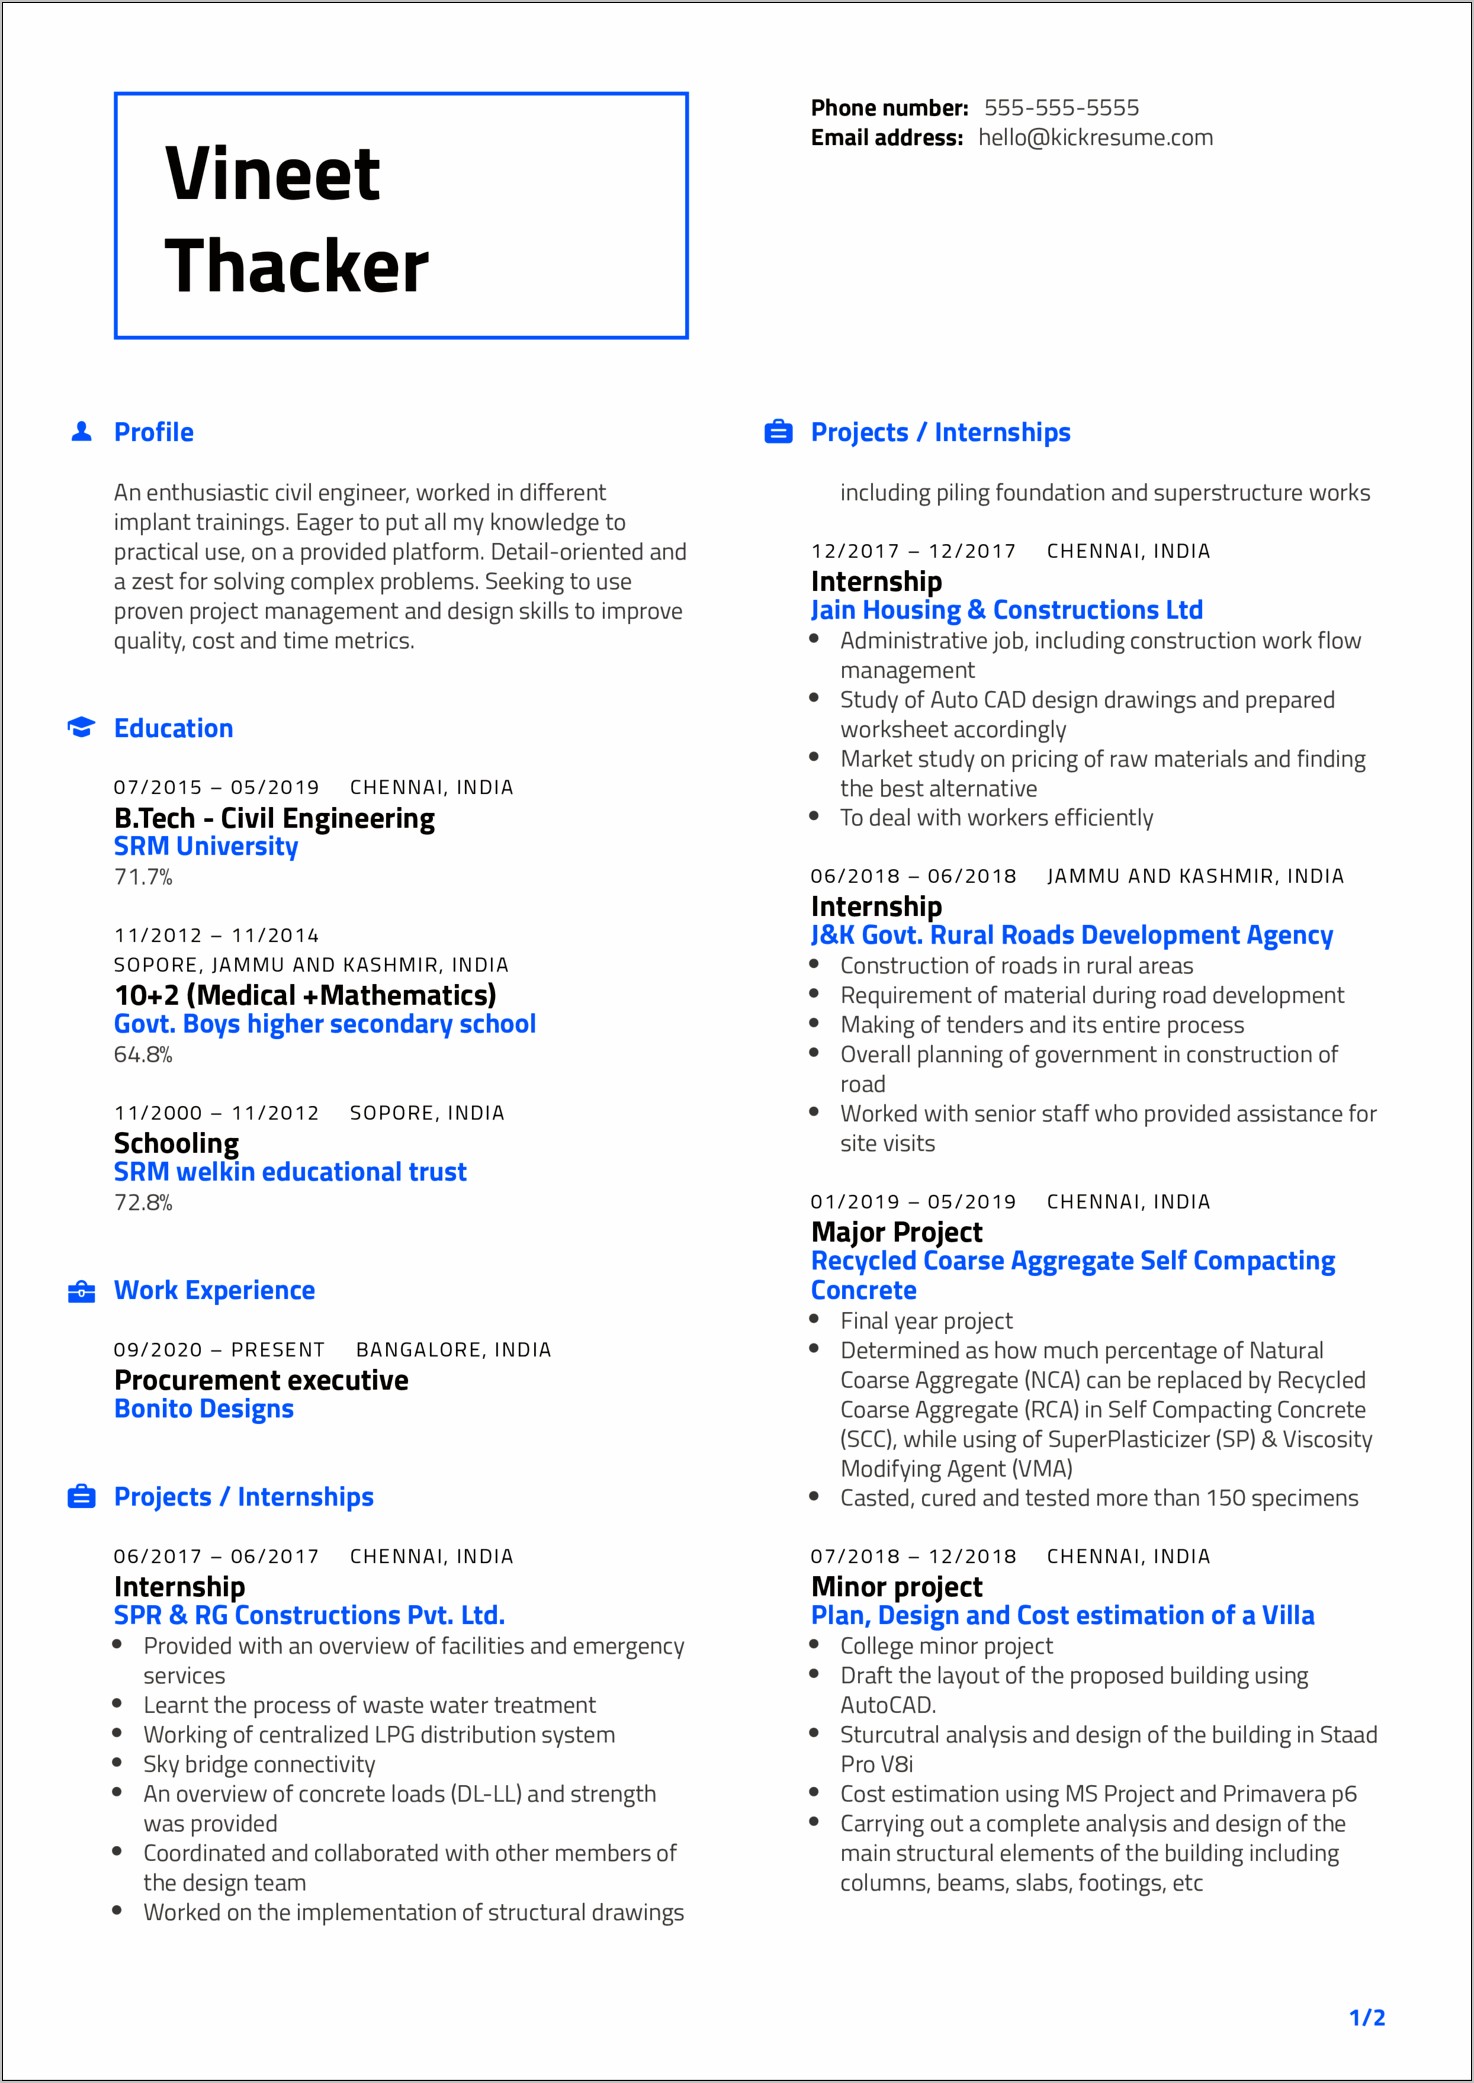 Best Resume Format For Admin Executive